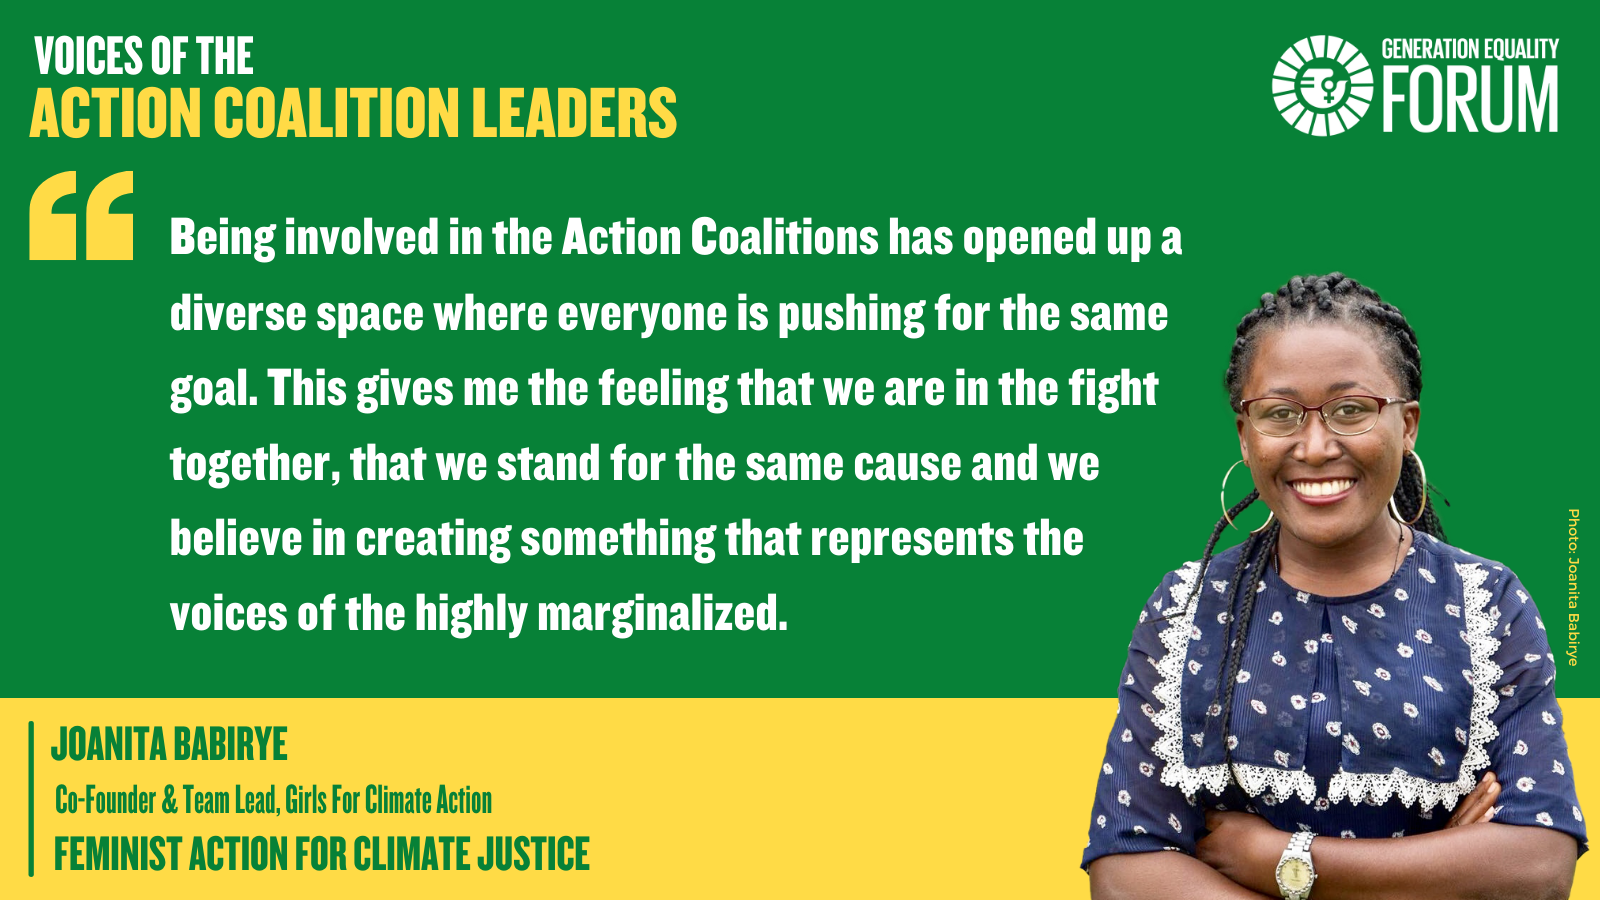 "Being involved in the Action Coalition has opened up a diverse space where everyone is pushing for the same goal. This gives me the feeling that we are in the fight together, that we stand for the same cause and we believe in creating something that represents the voices of the highly margianlized" -  Joanita Babirye